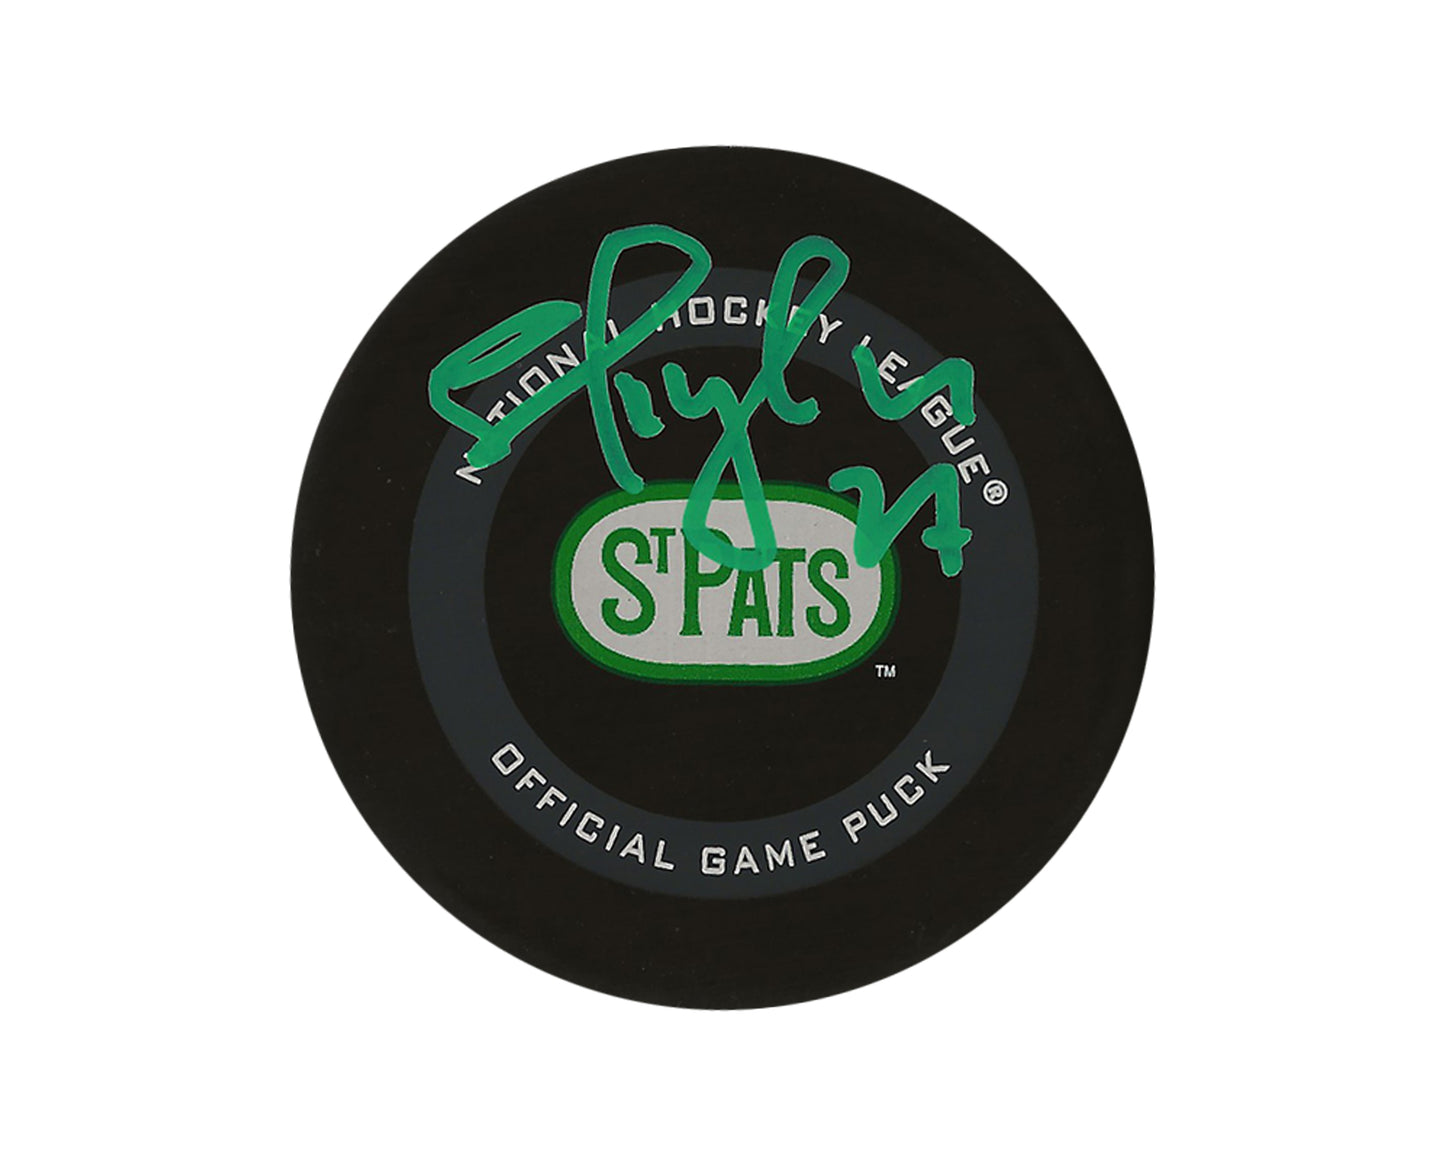 Shayne Corson Autographed Toronto Maple Leafs St. Pats Official Game Puck